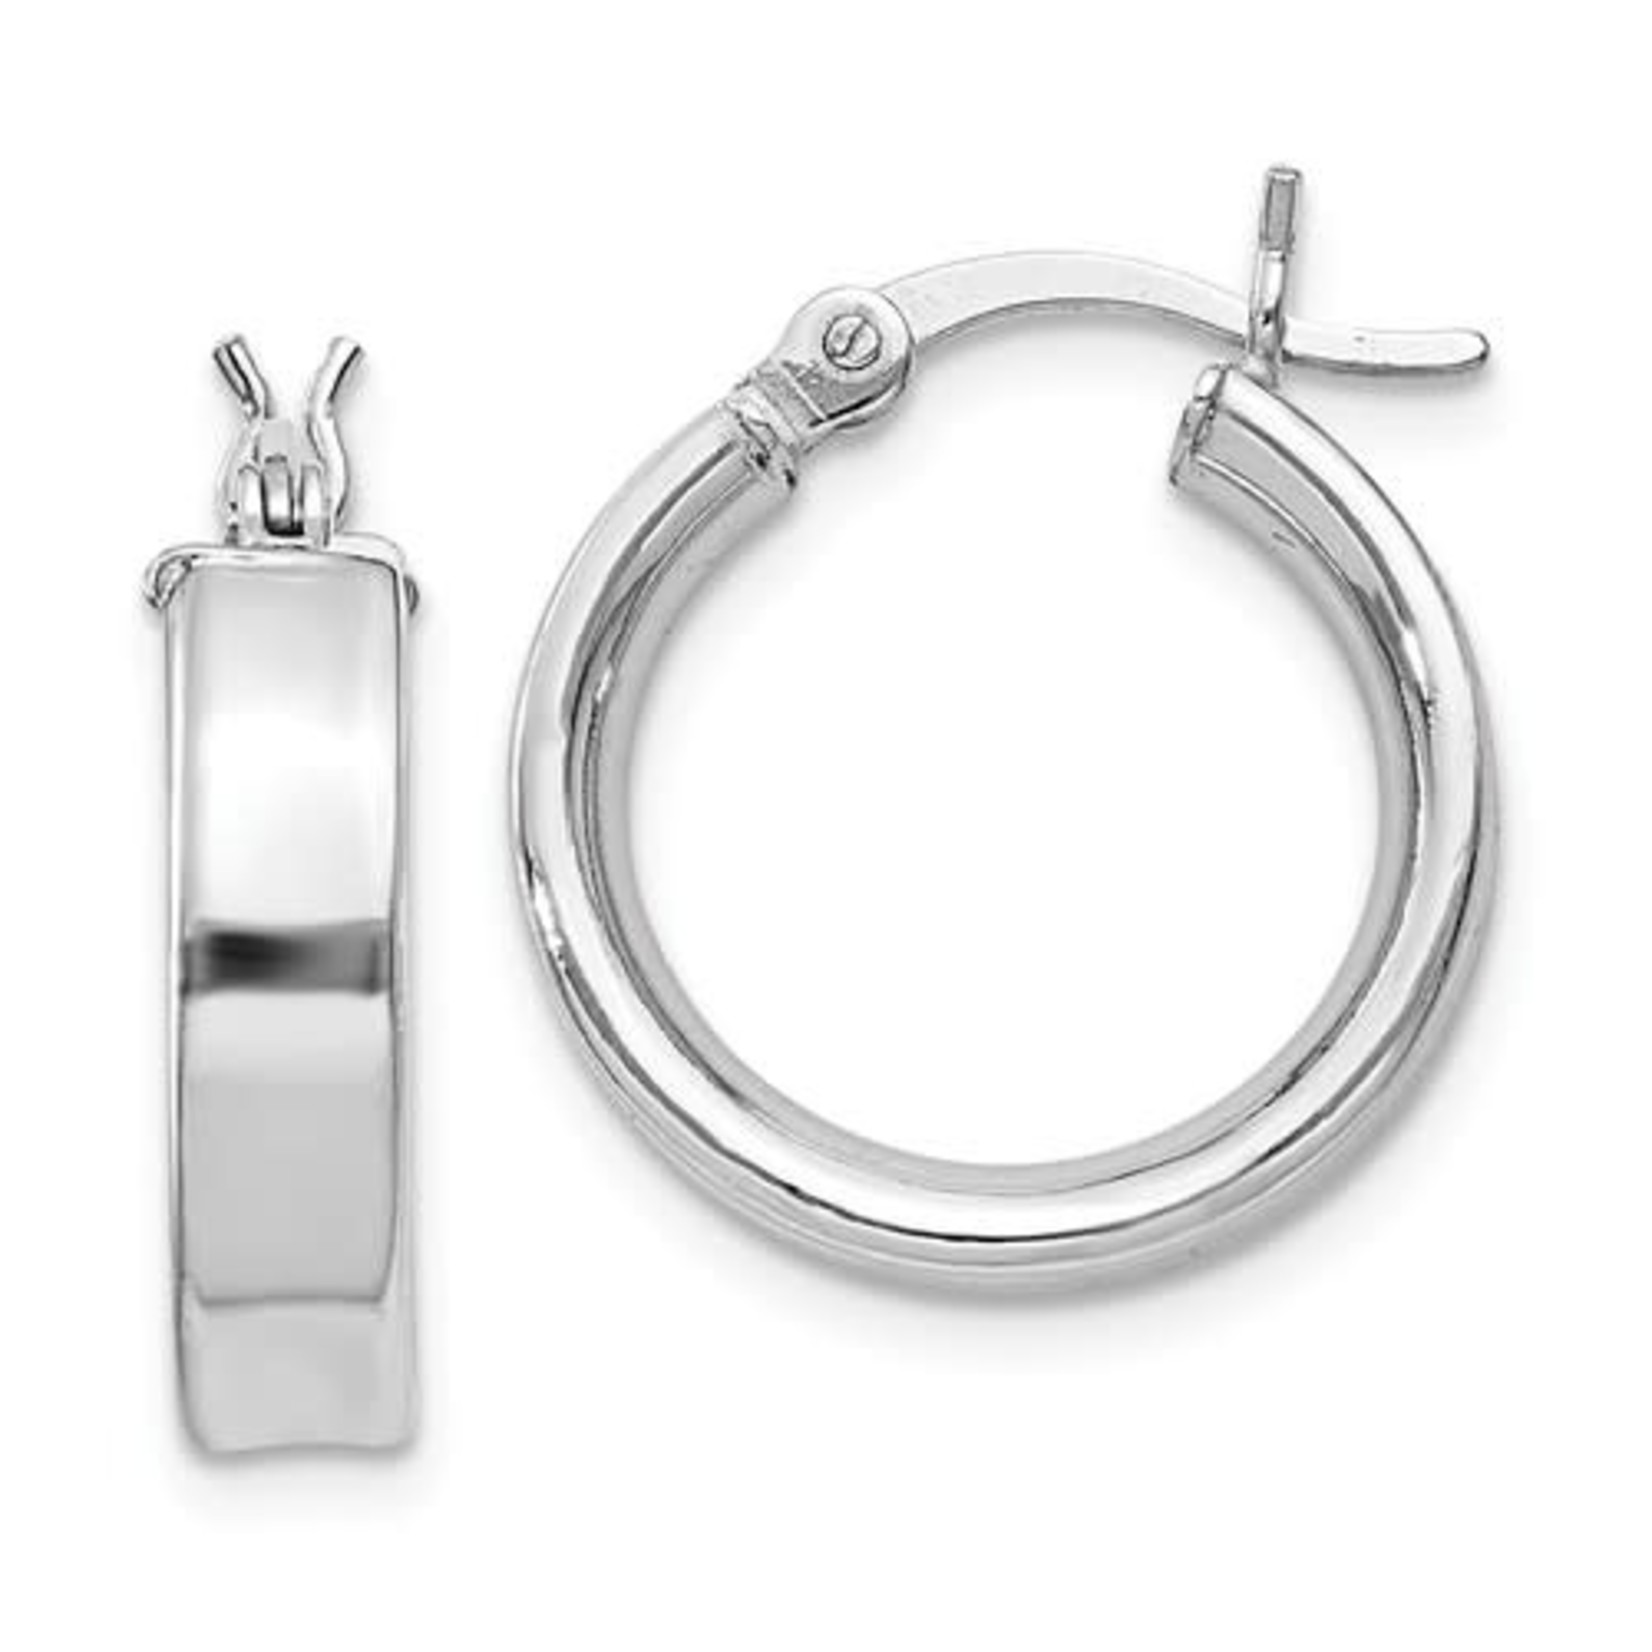 This Is Life My Go To Hoop Earrings - Sterling Silver